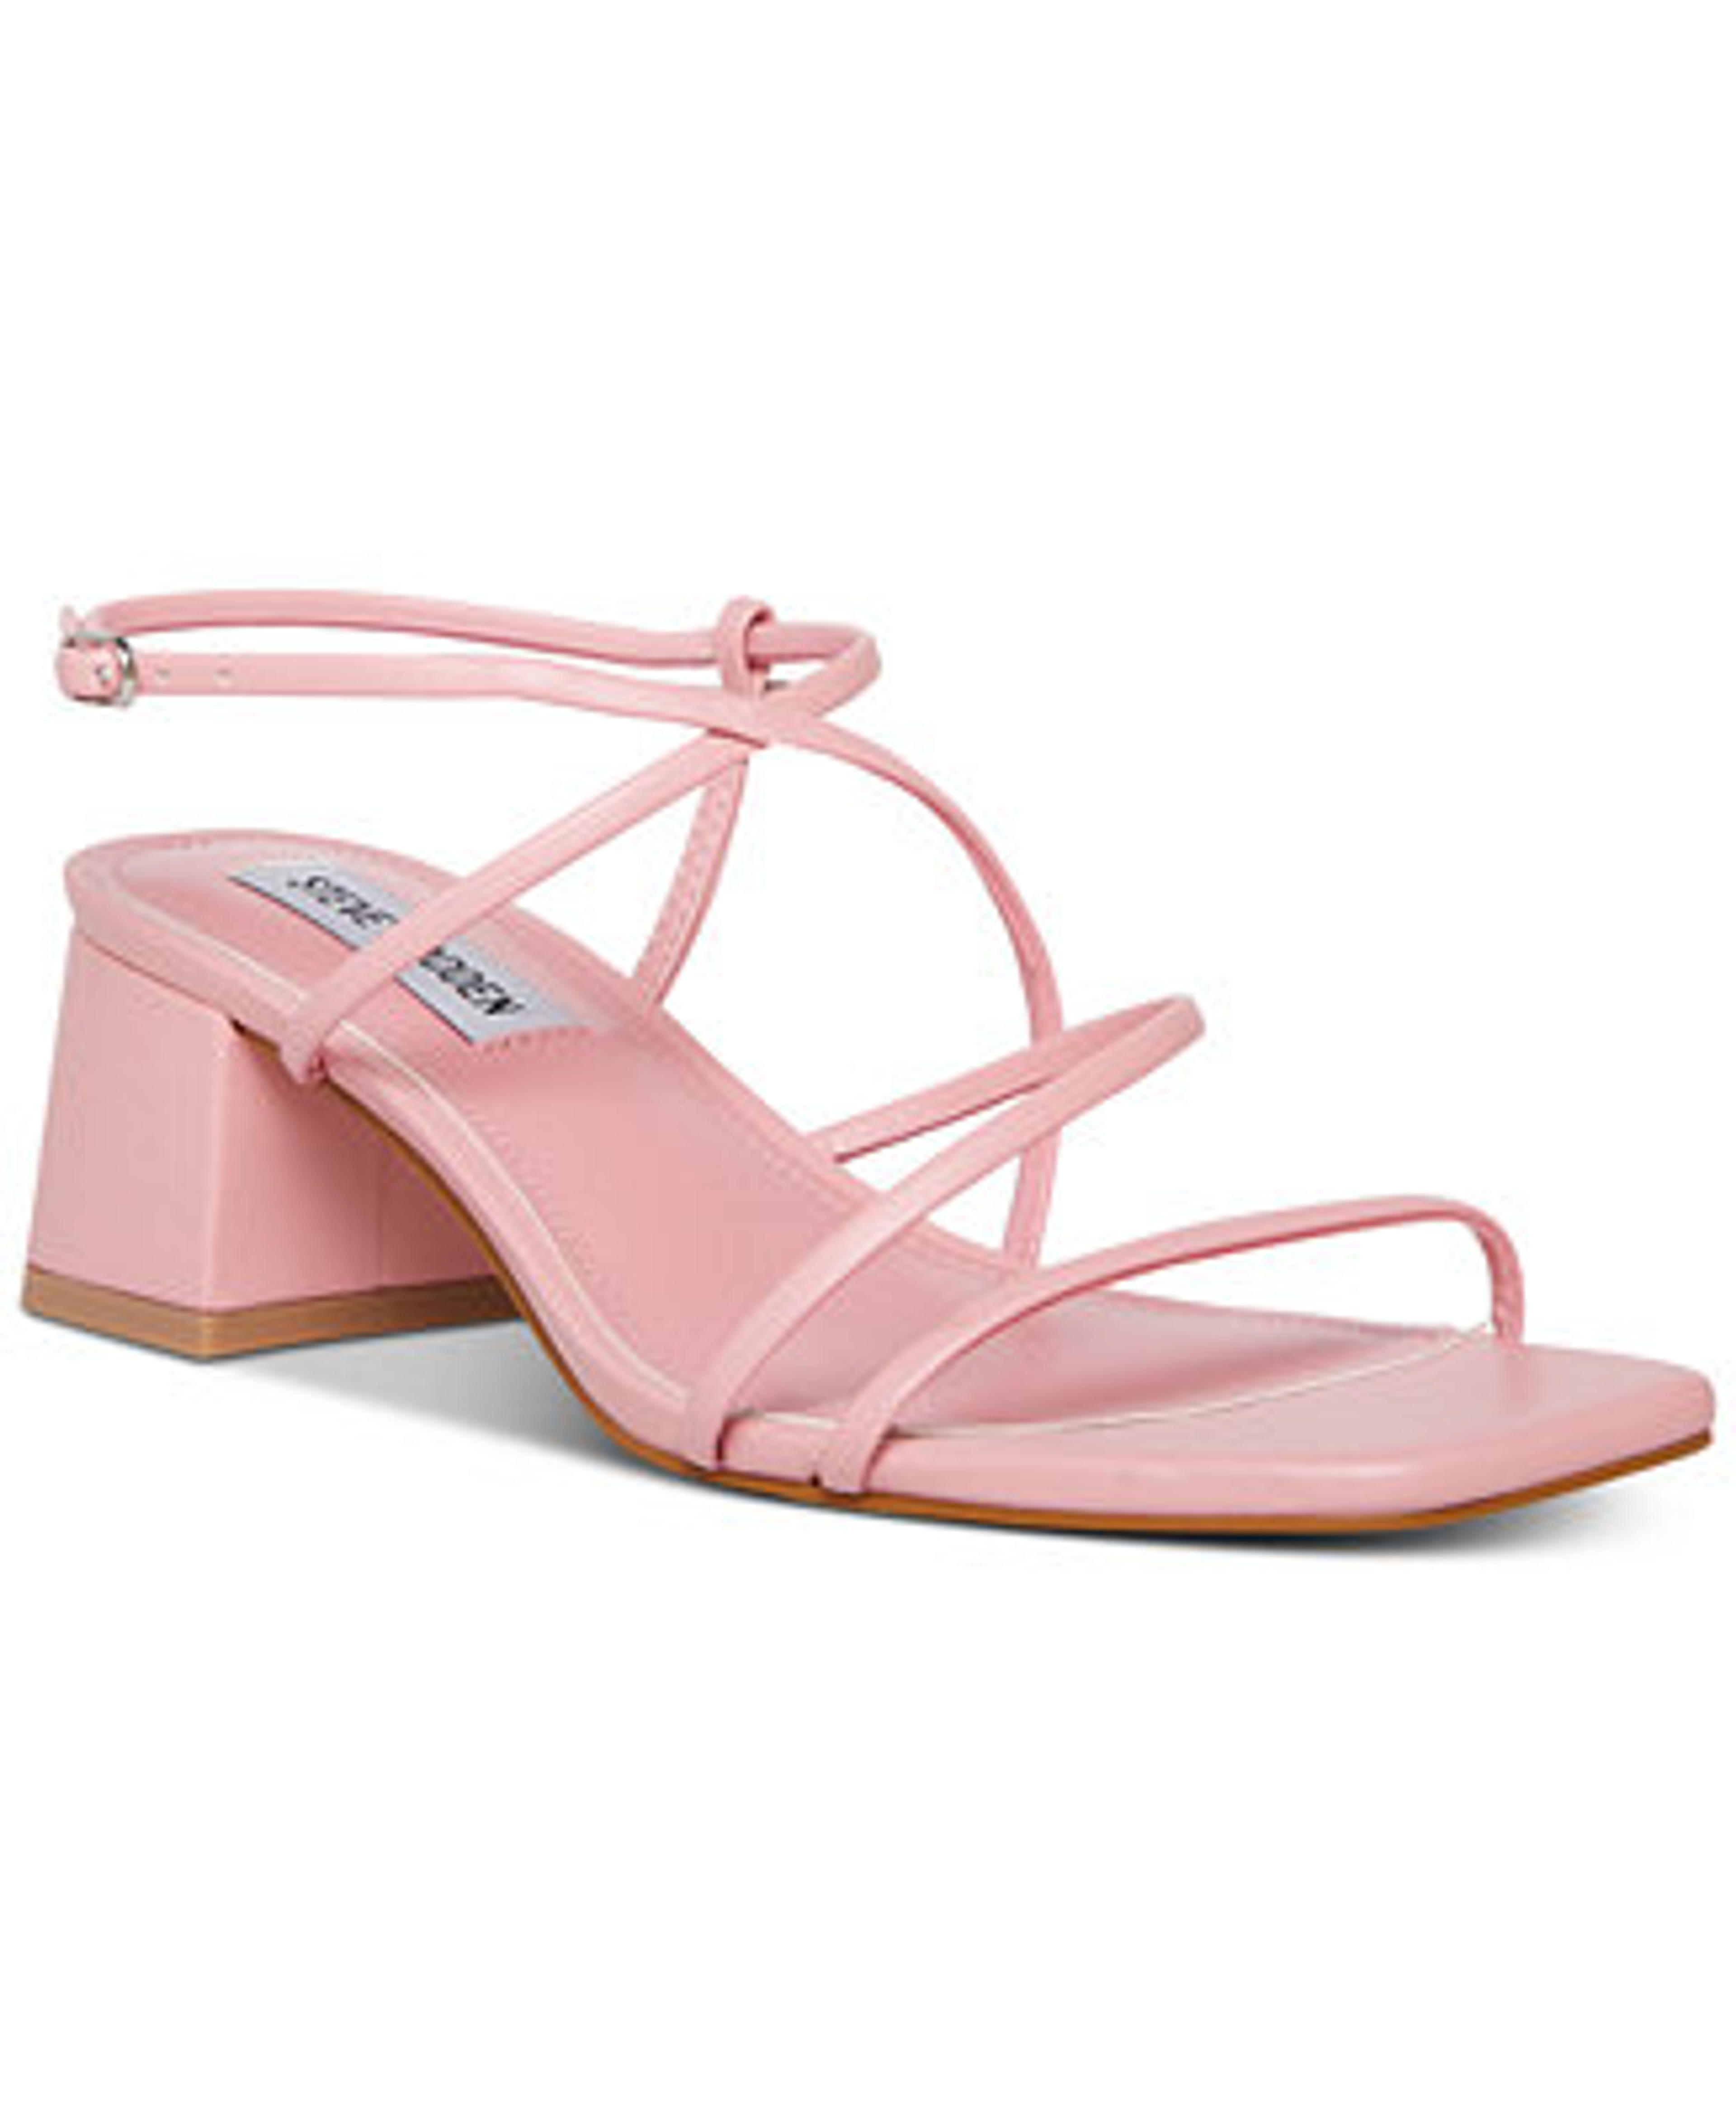 Steve Madden Women's Rianna Strappy Block-Heel Sandals & Reviews - Sandals - Shoes - Macy's